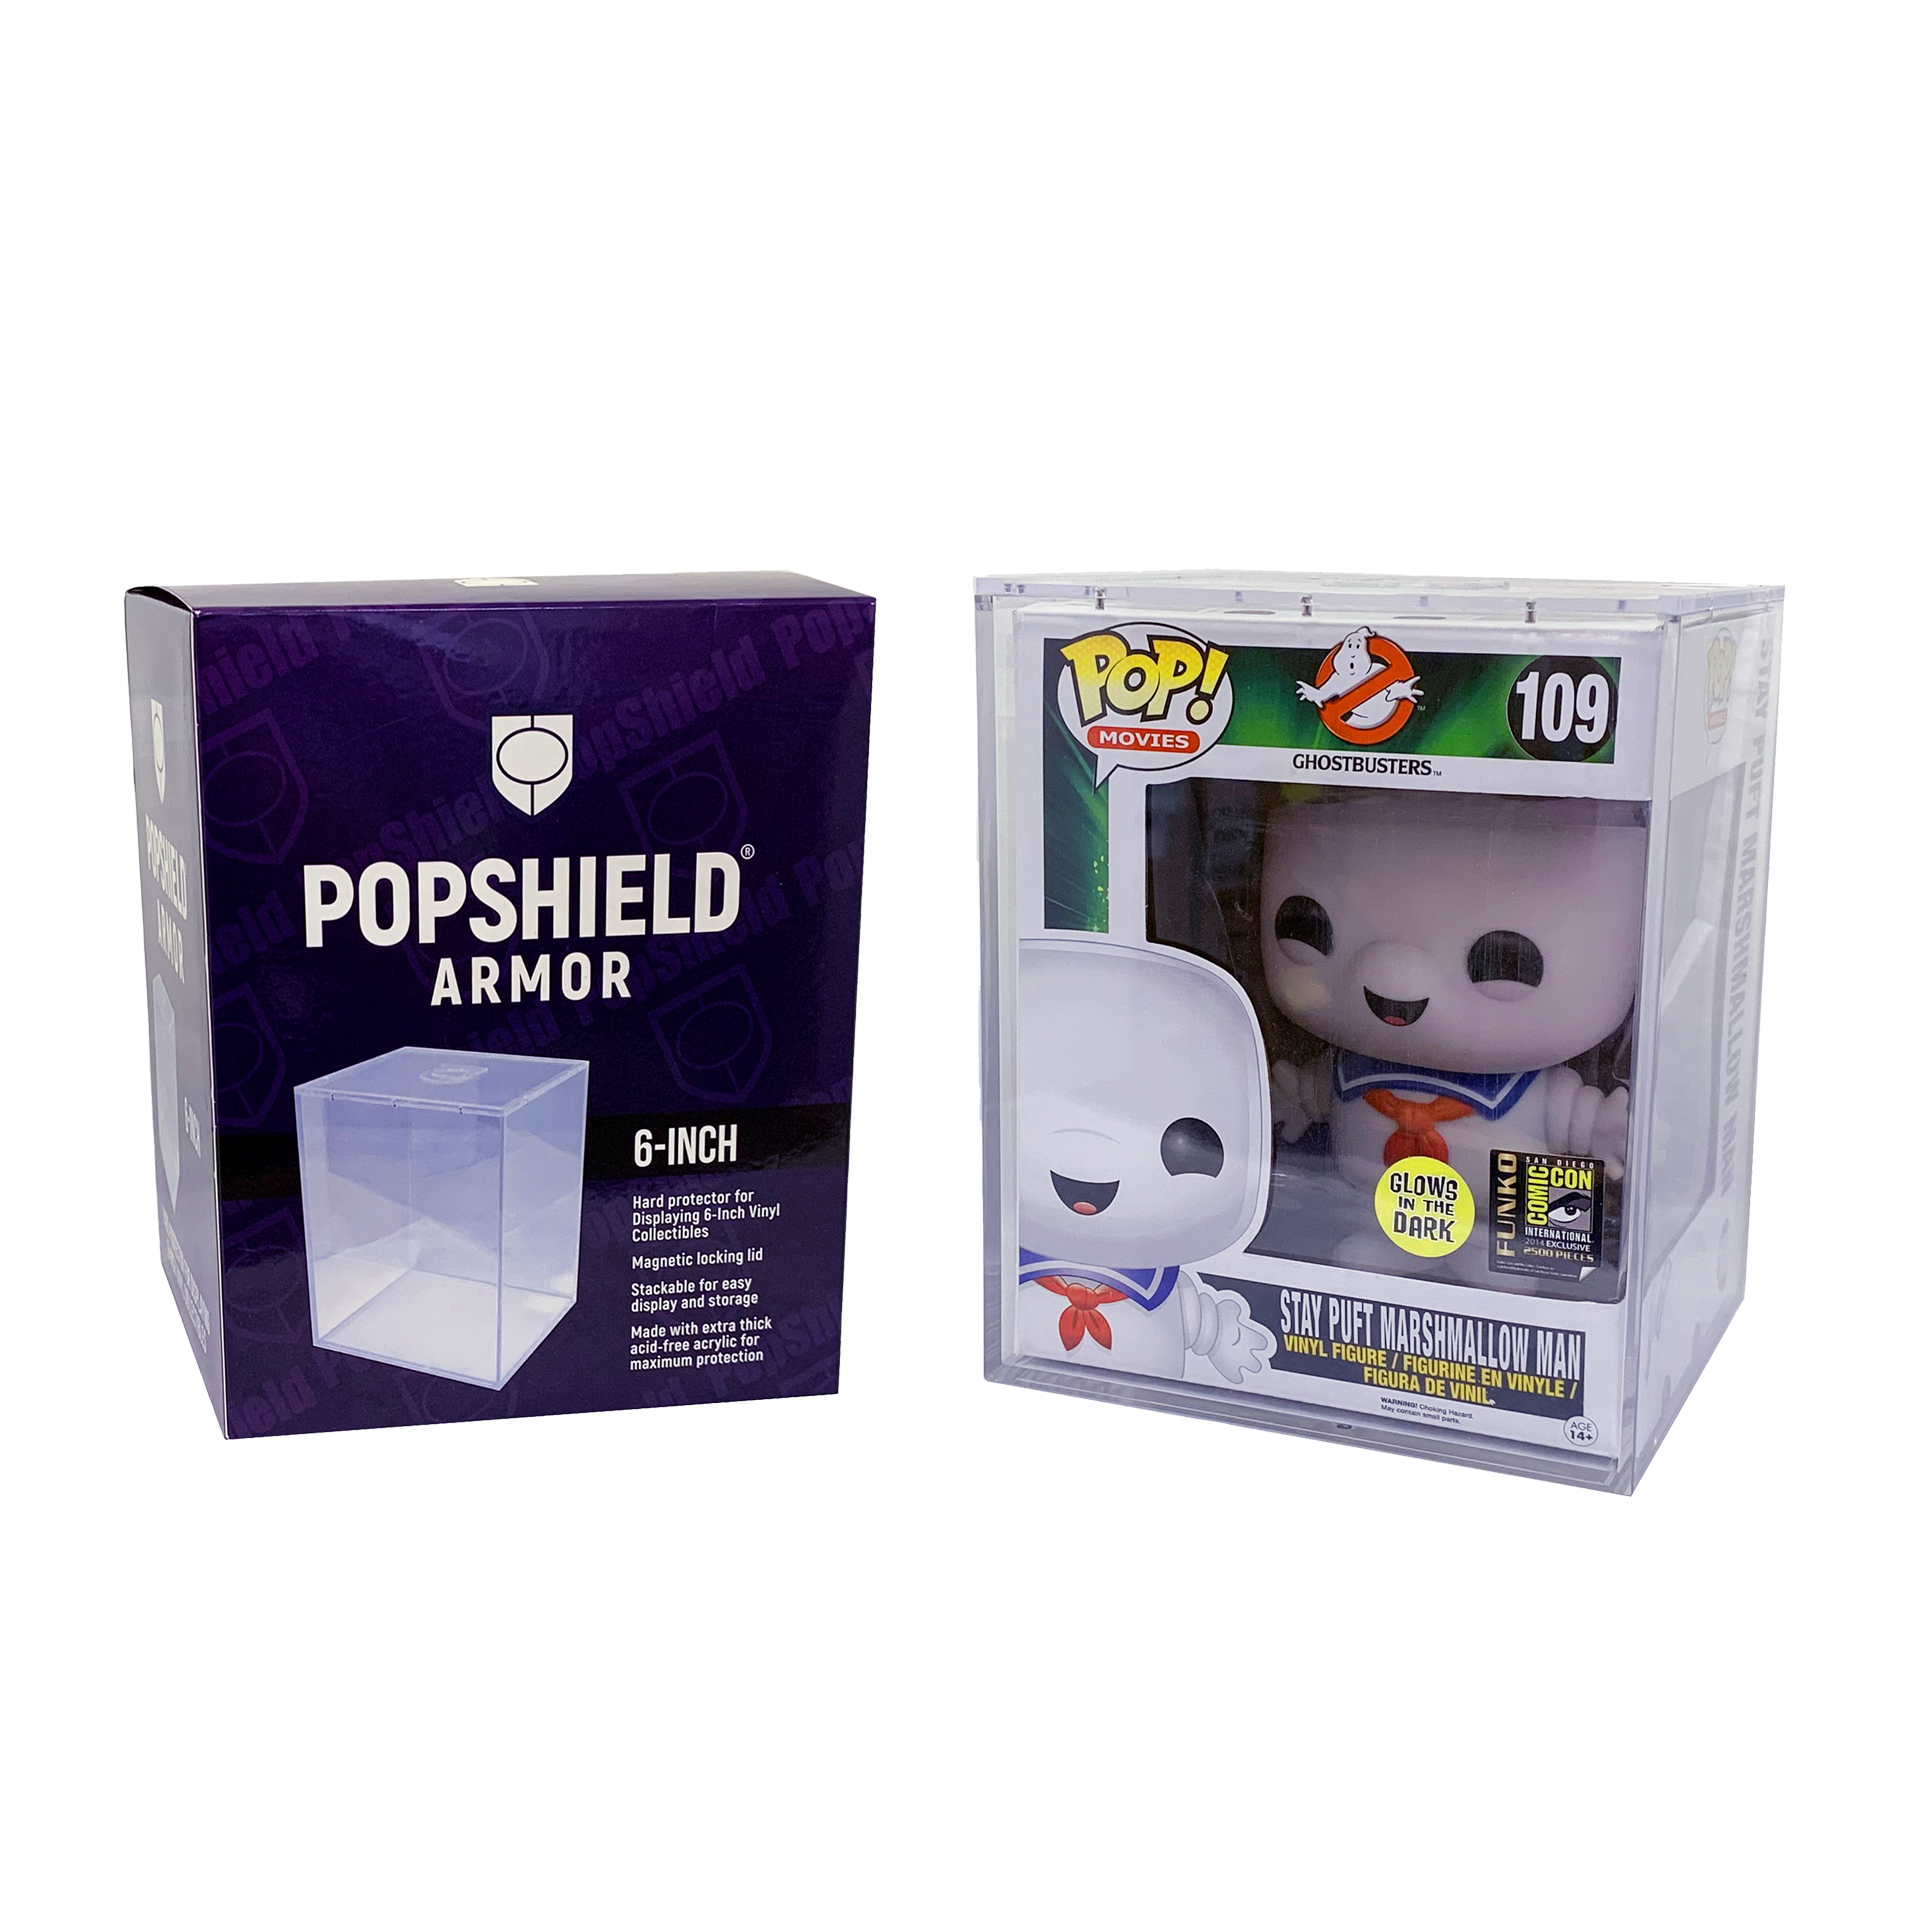 Custom PopShield Armor Hard Protector with Exclusive Zobie Design – Zobie  Productions